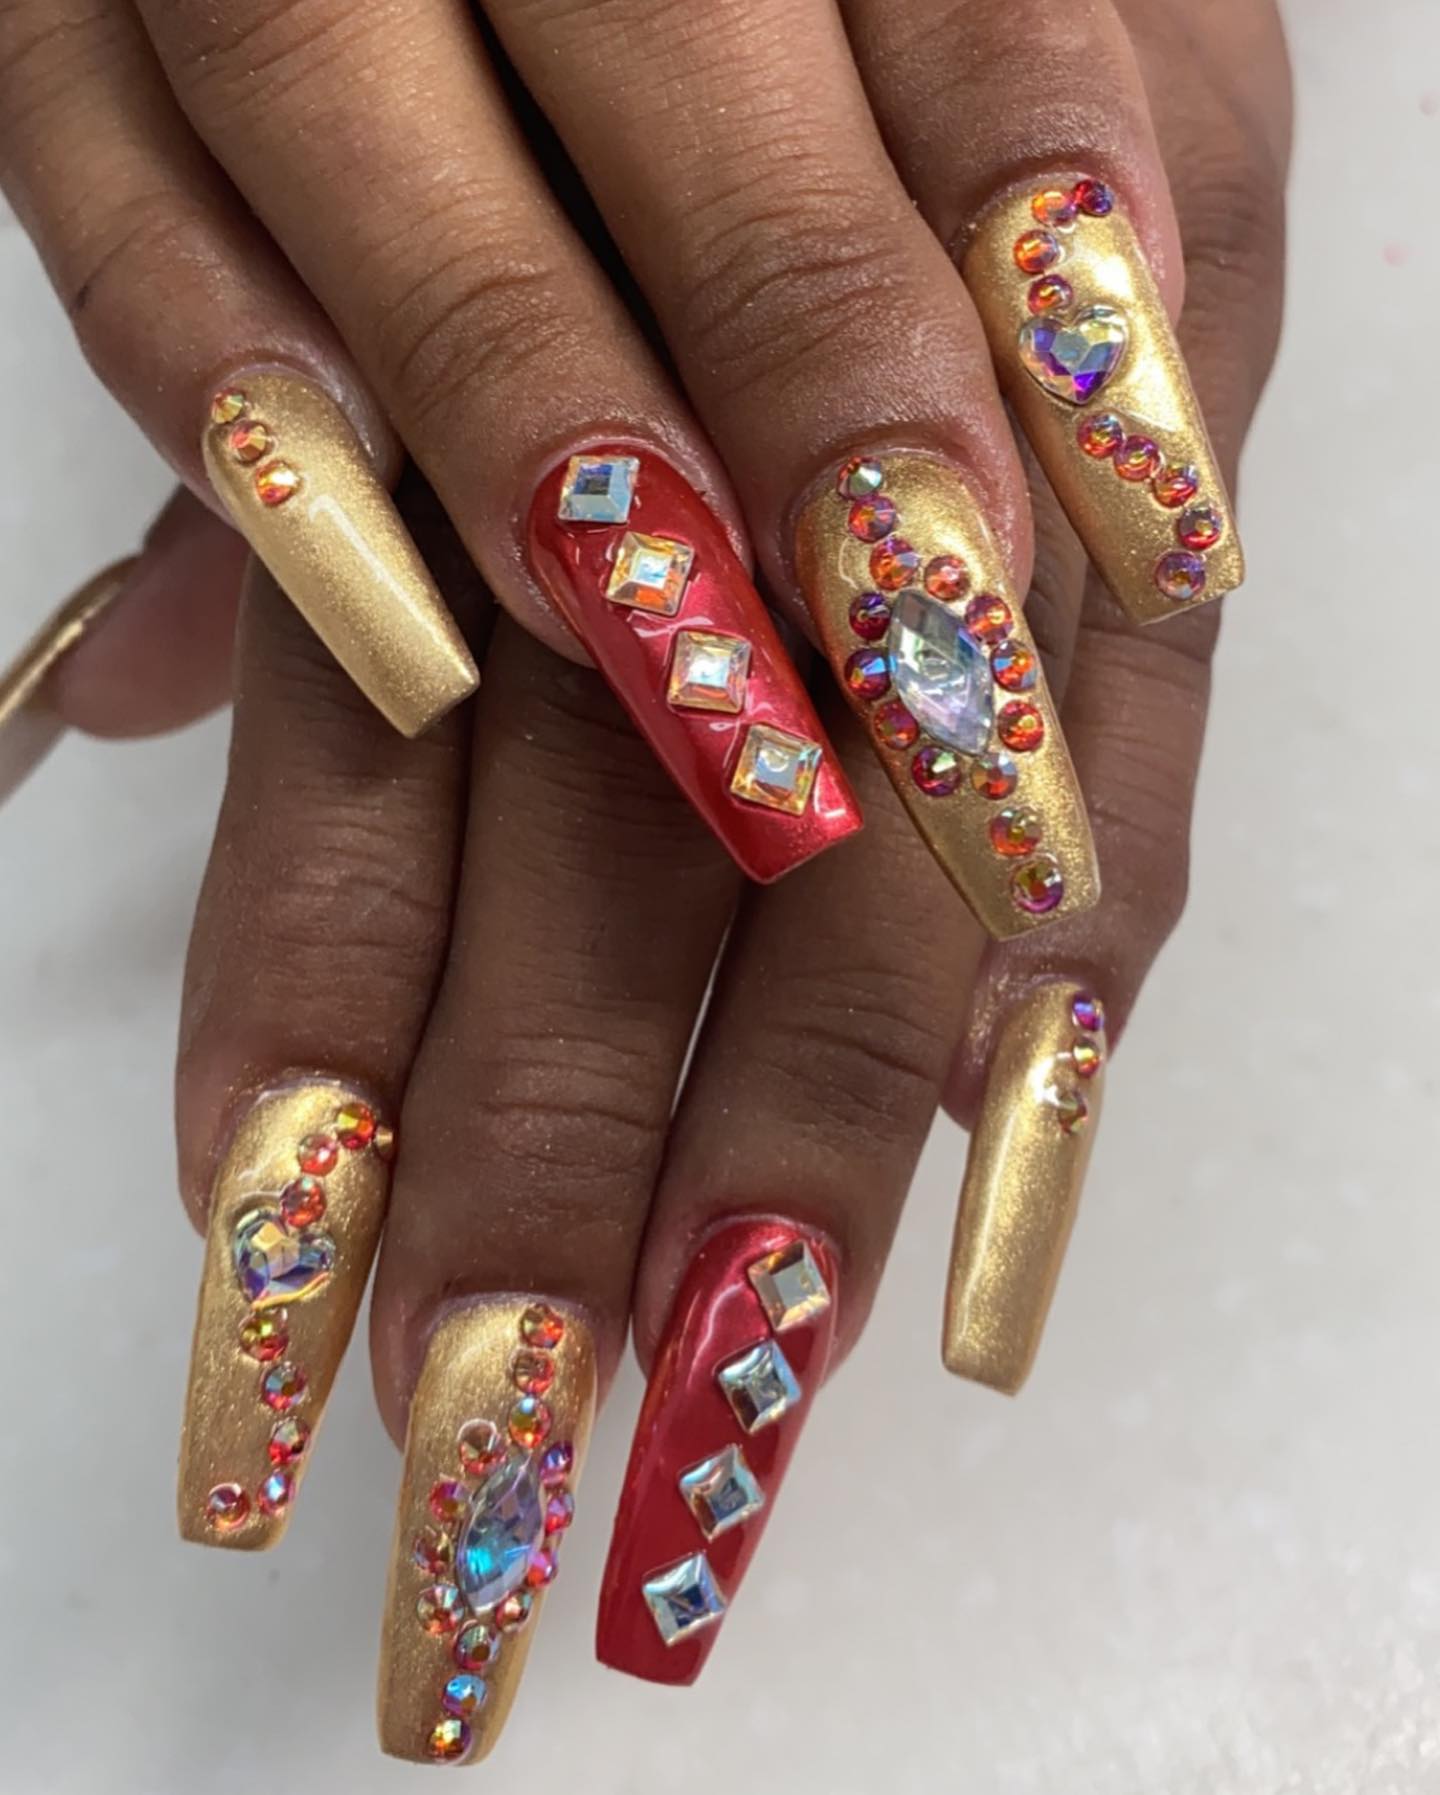 If you like very detailed nail arts, I mean lots of shiny stones, this nail idea is for you. These stones look great on the top of gold and red chrome nails.